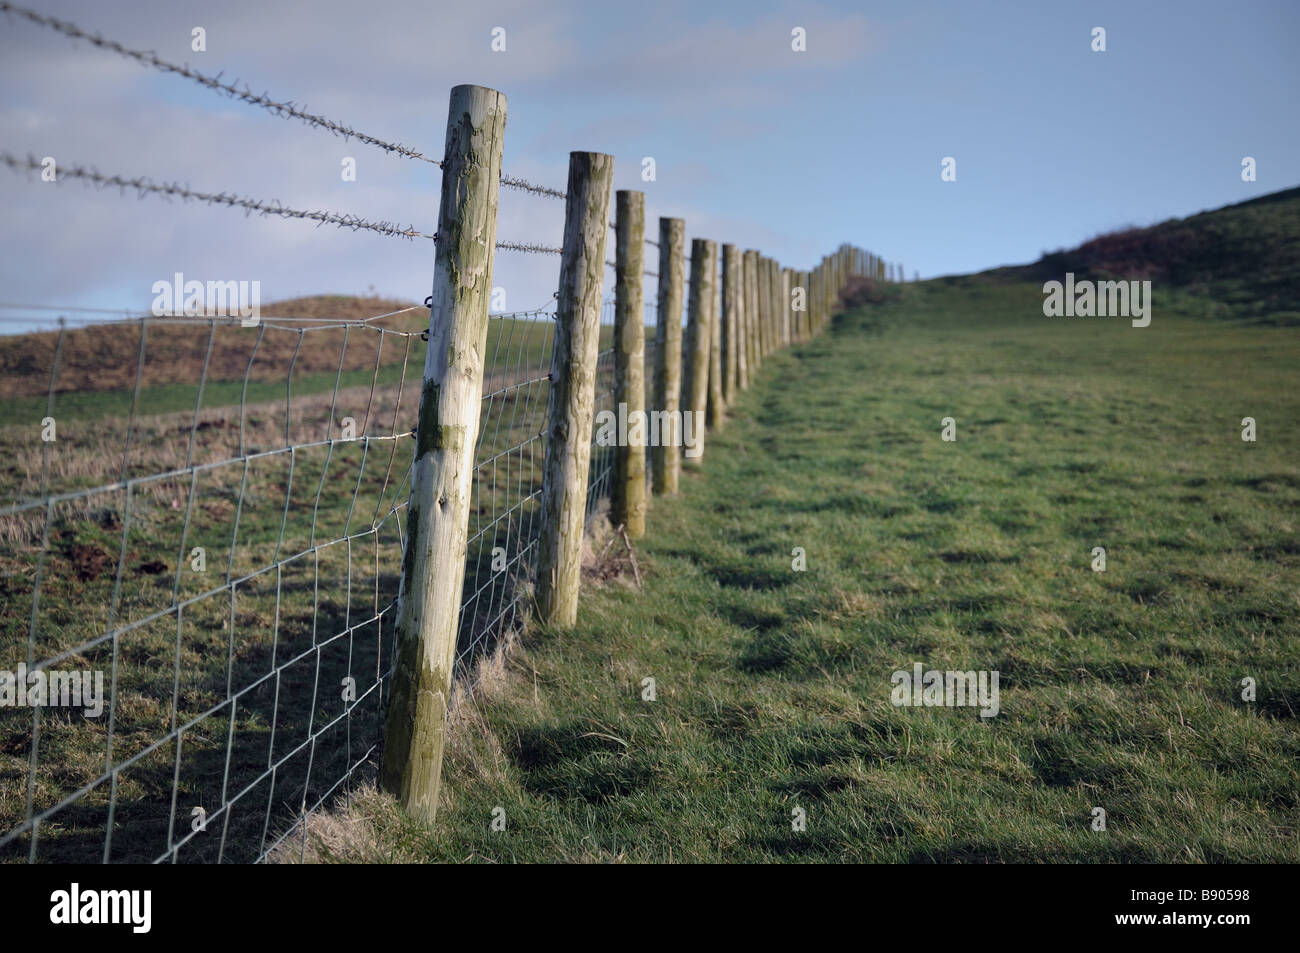 Country fence of wooden posts and wire Stock Photo